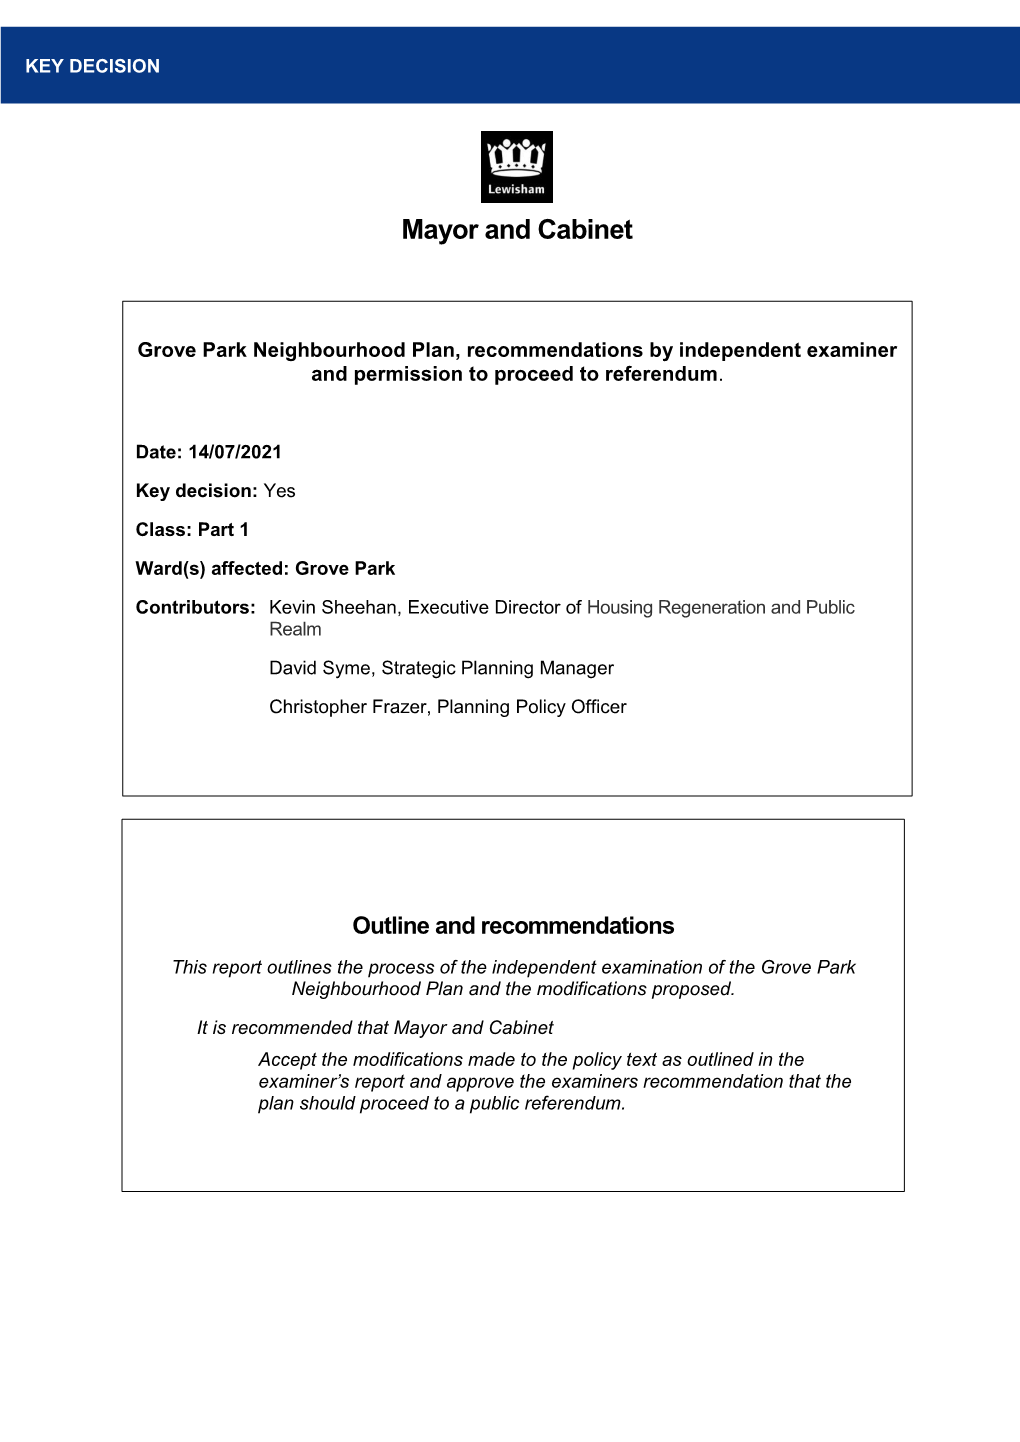 Grove Park Neighbourhood Plan, Recommendations by Independent Examiner and Permission to Proceed to Referendum